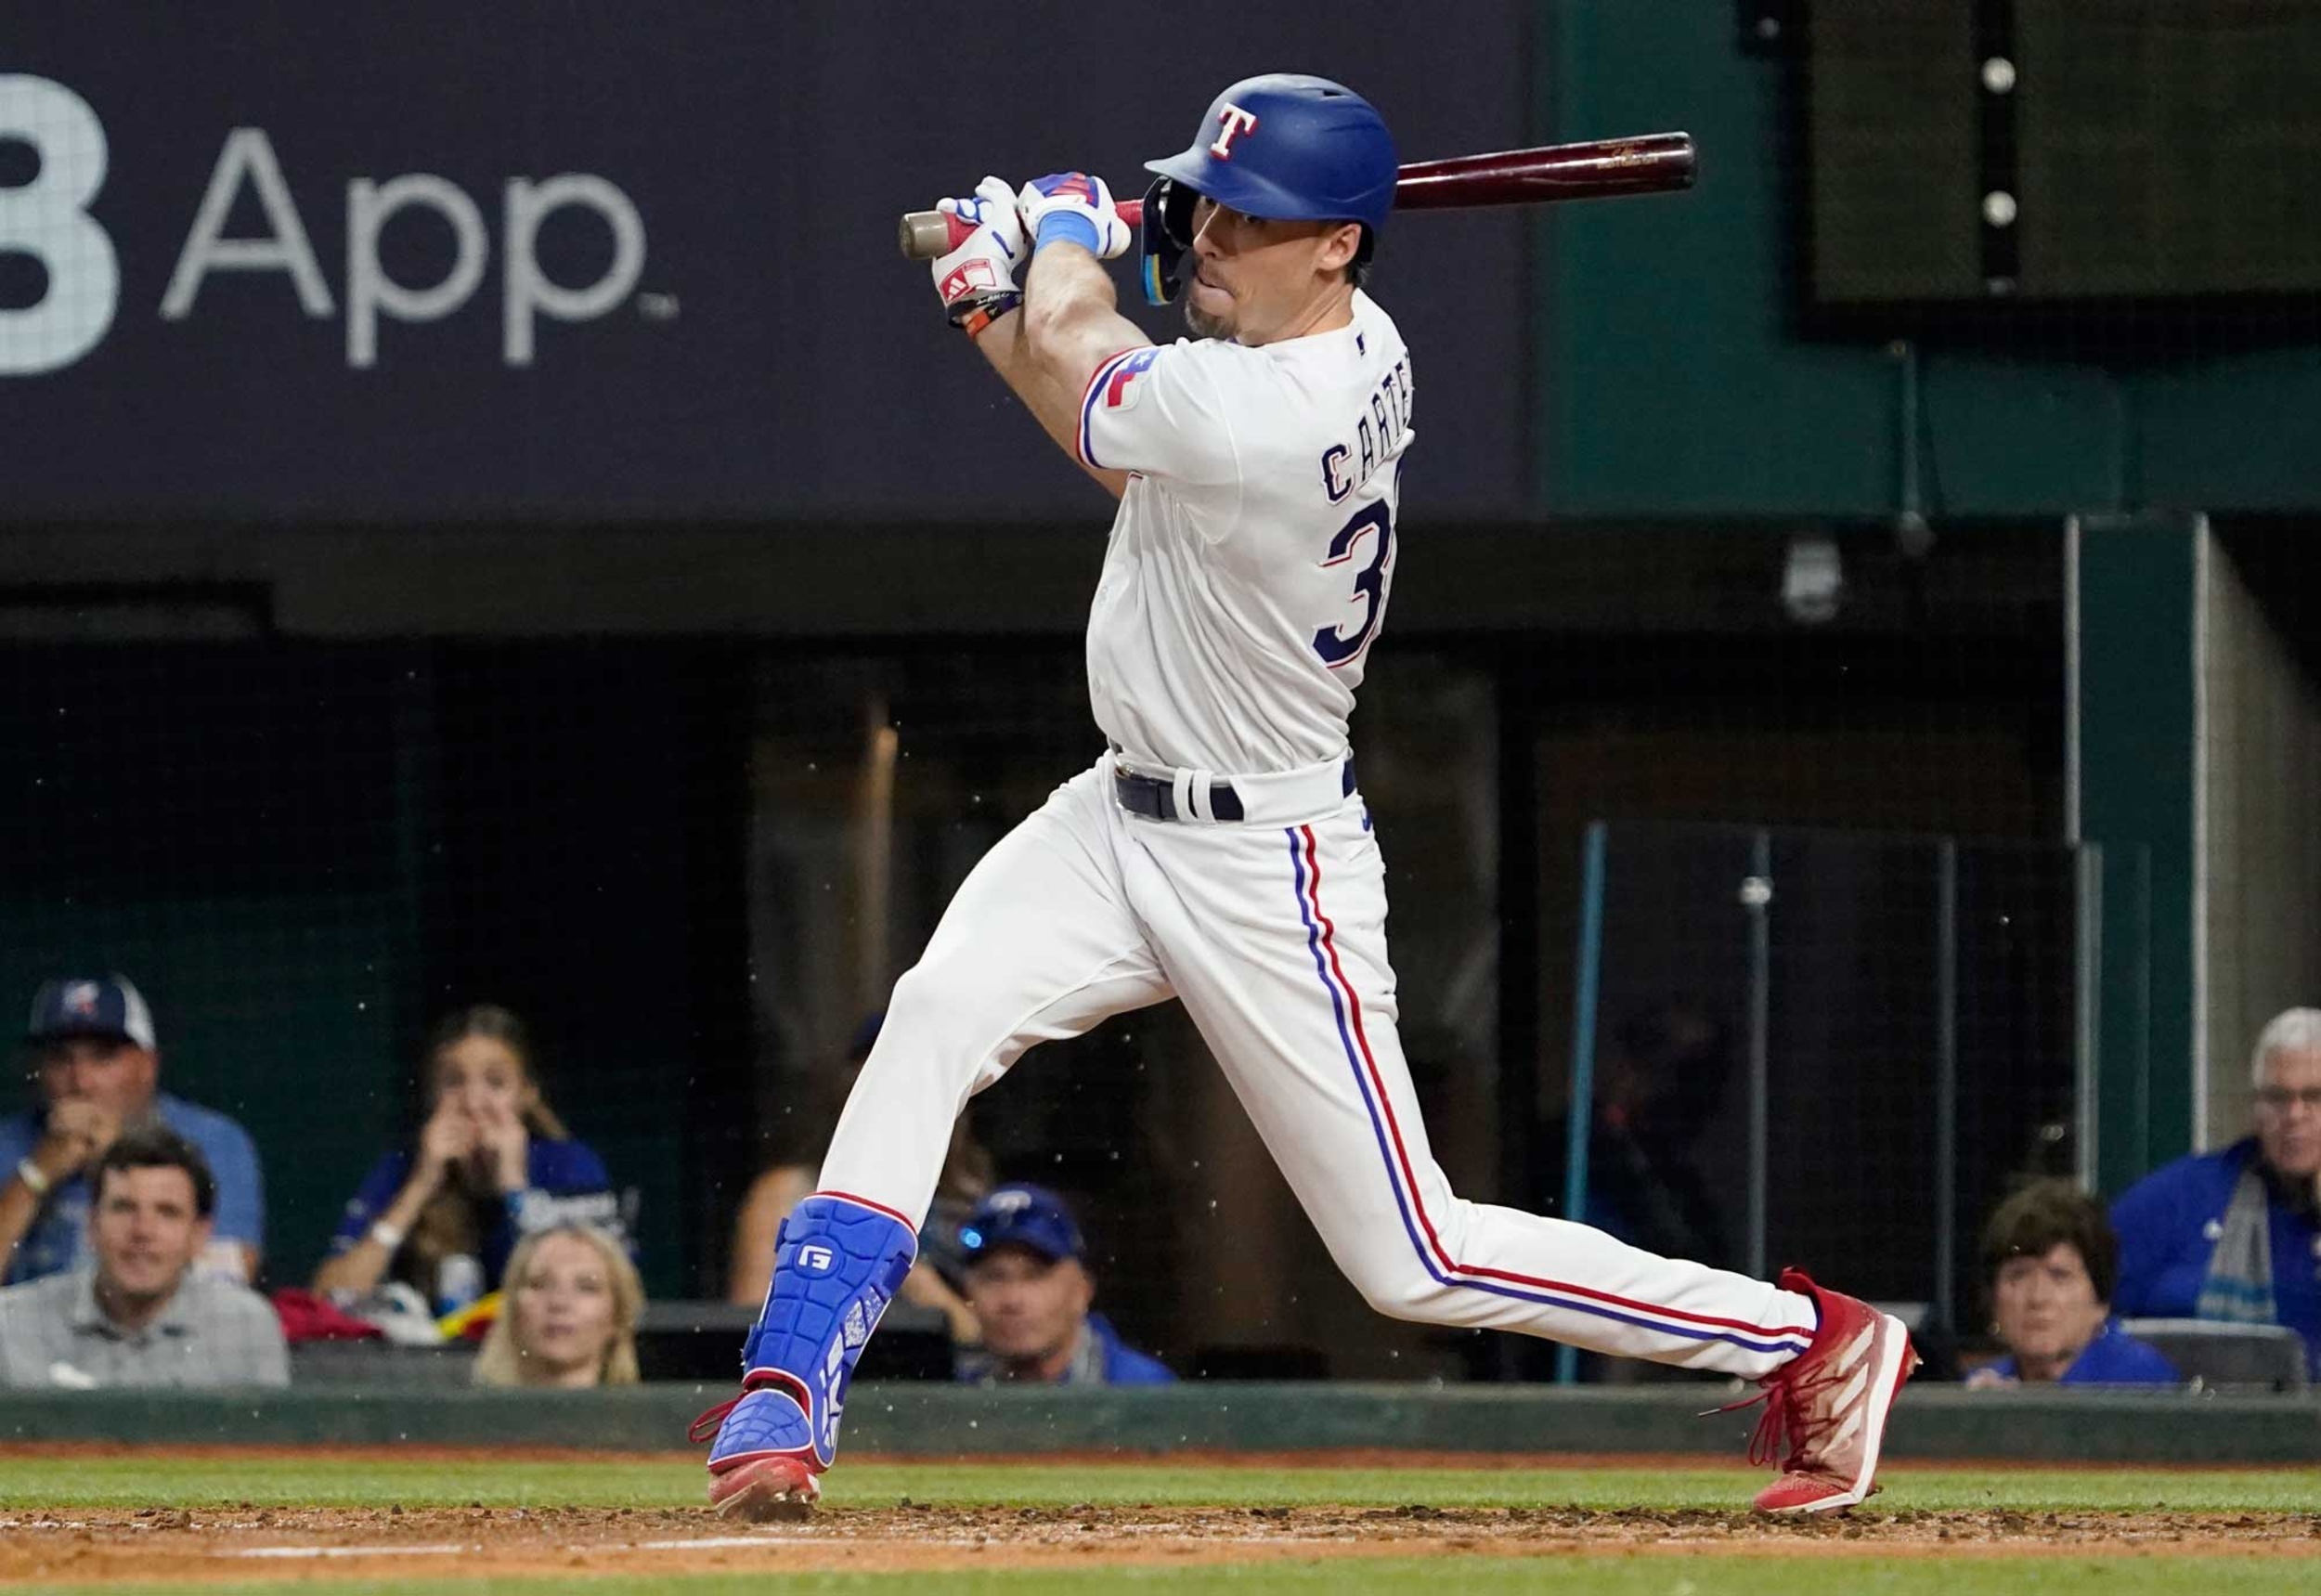 <p>Carter was the Rangers X-factor in the playoffs, and the team hopes his impact continues into the 2024 regular season. He posted an OPS above .900 in 40 games between the regular season and playoffs, and the team needs the offense to step up after losing Max Scherzer to injury.</p><p><a href='https://www.msn.com/en-us/community/channel/vid-cj9pqbr0vn9in2b6ddcd8sfgpfq6x6utp44fssrv6mc2gtybw0us'>Follow us on MSN to see more of our exclusive MLB content.</a></p>